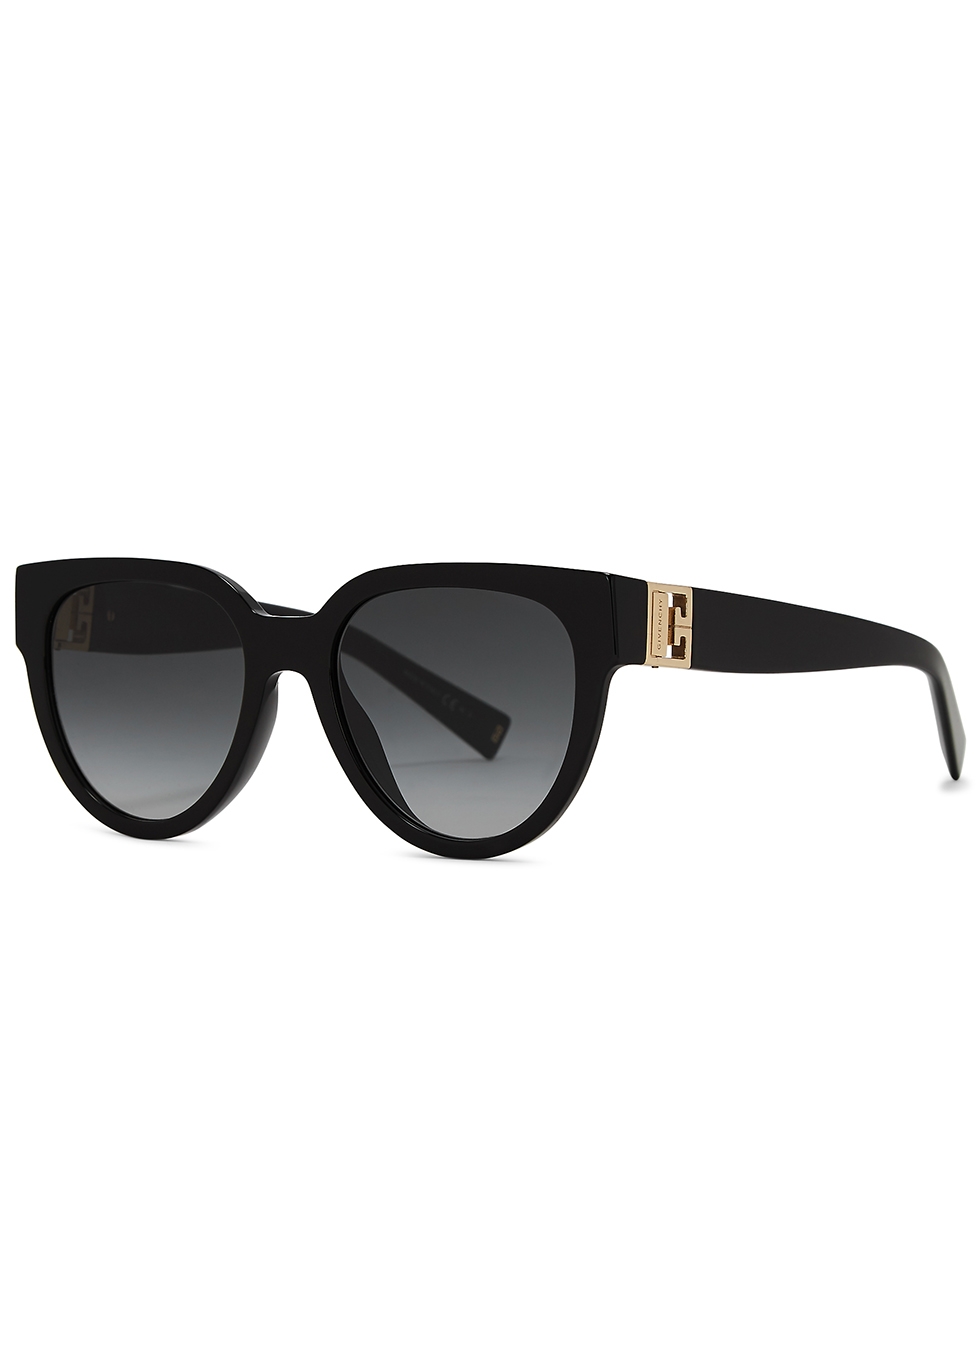 sunglasses givenchy women's